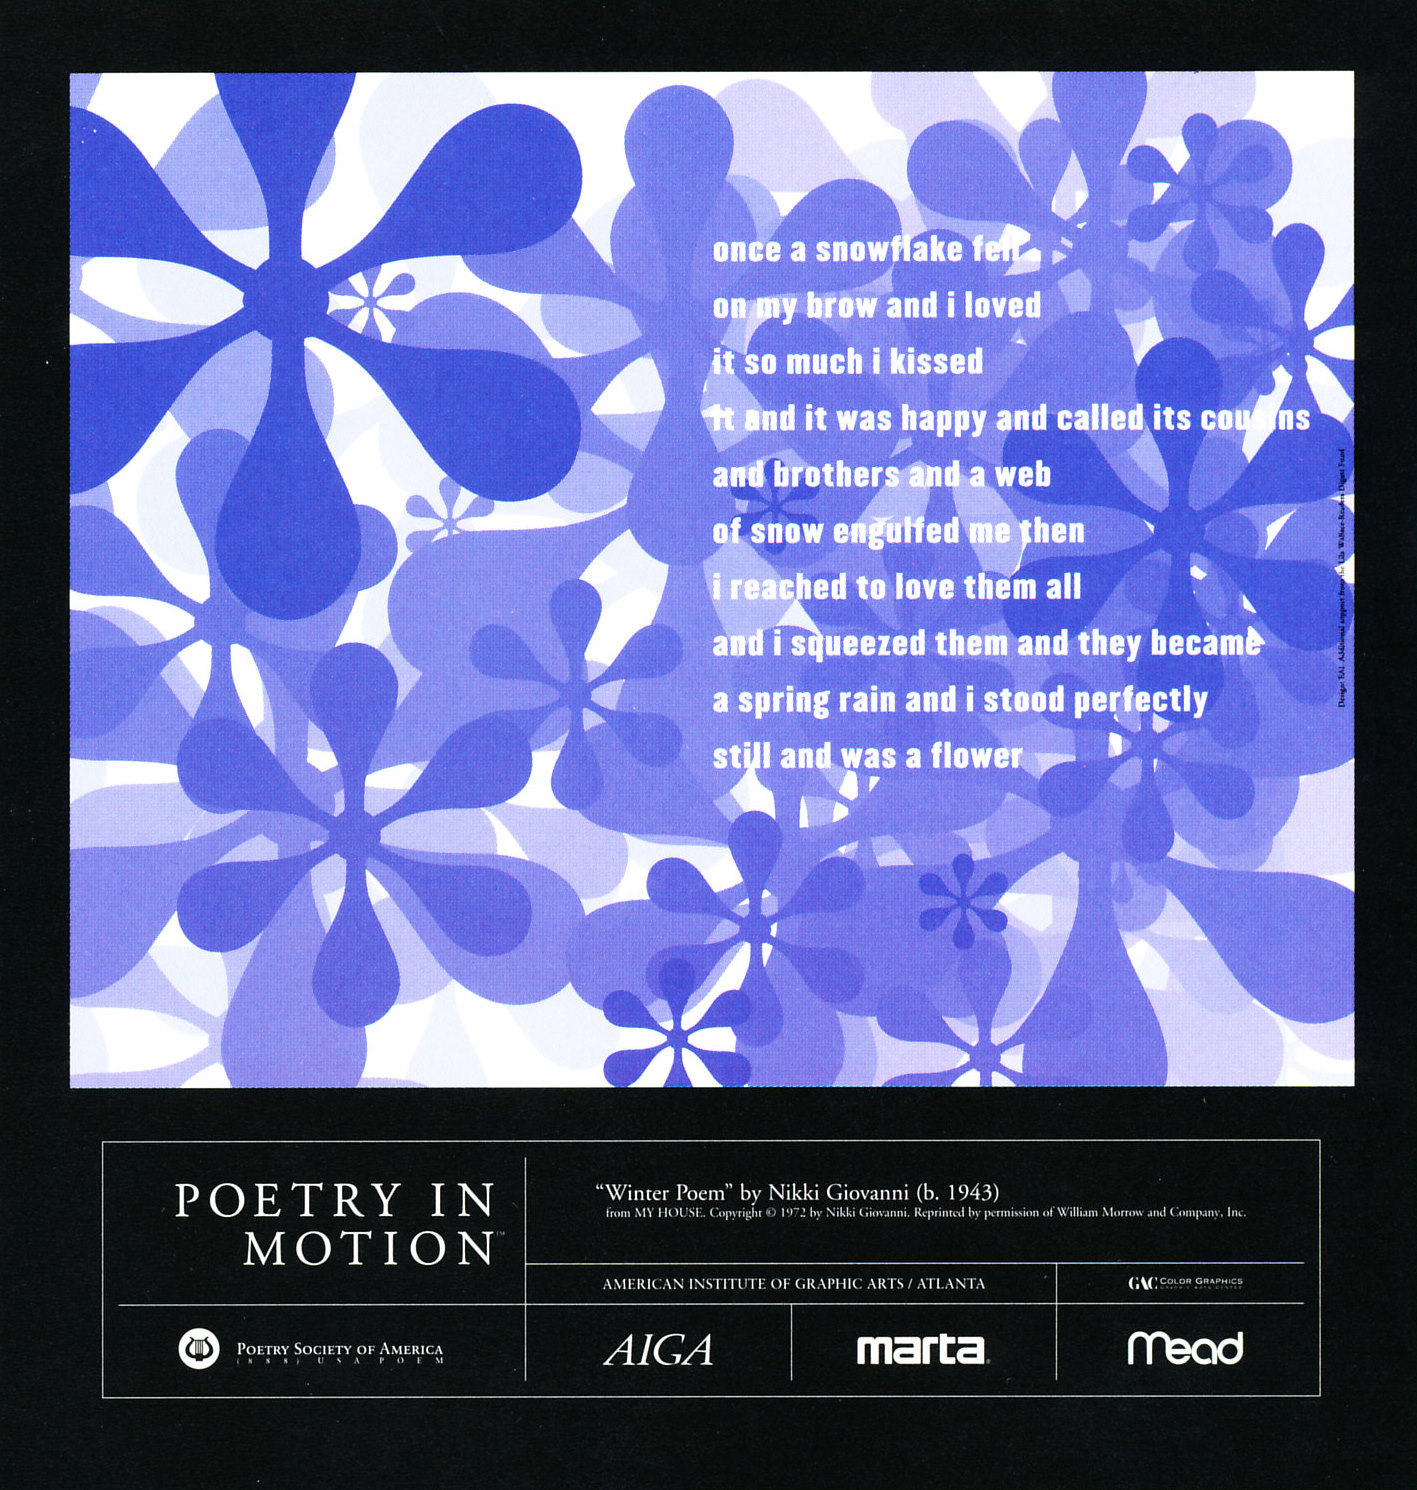 A white poster with purple snowflakes resembling flowers features a poem titled Winter Poem by Nikki Giovanni.